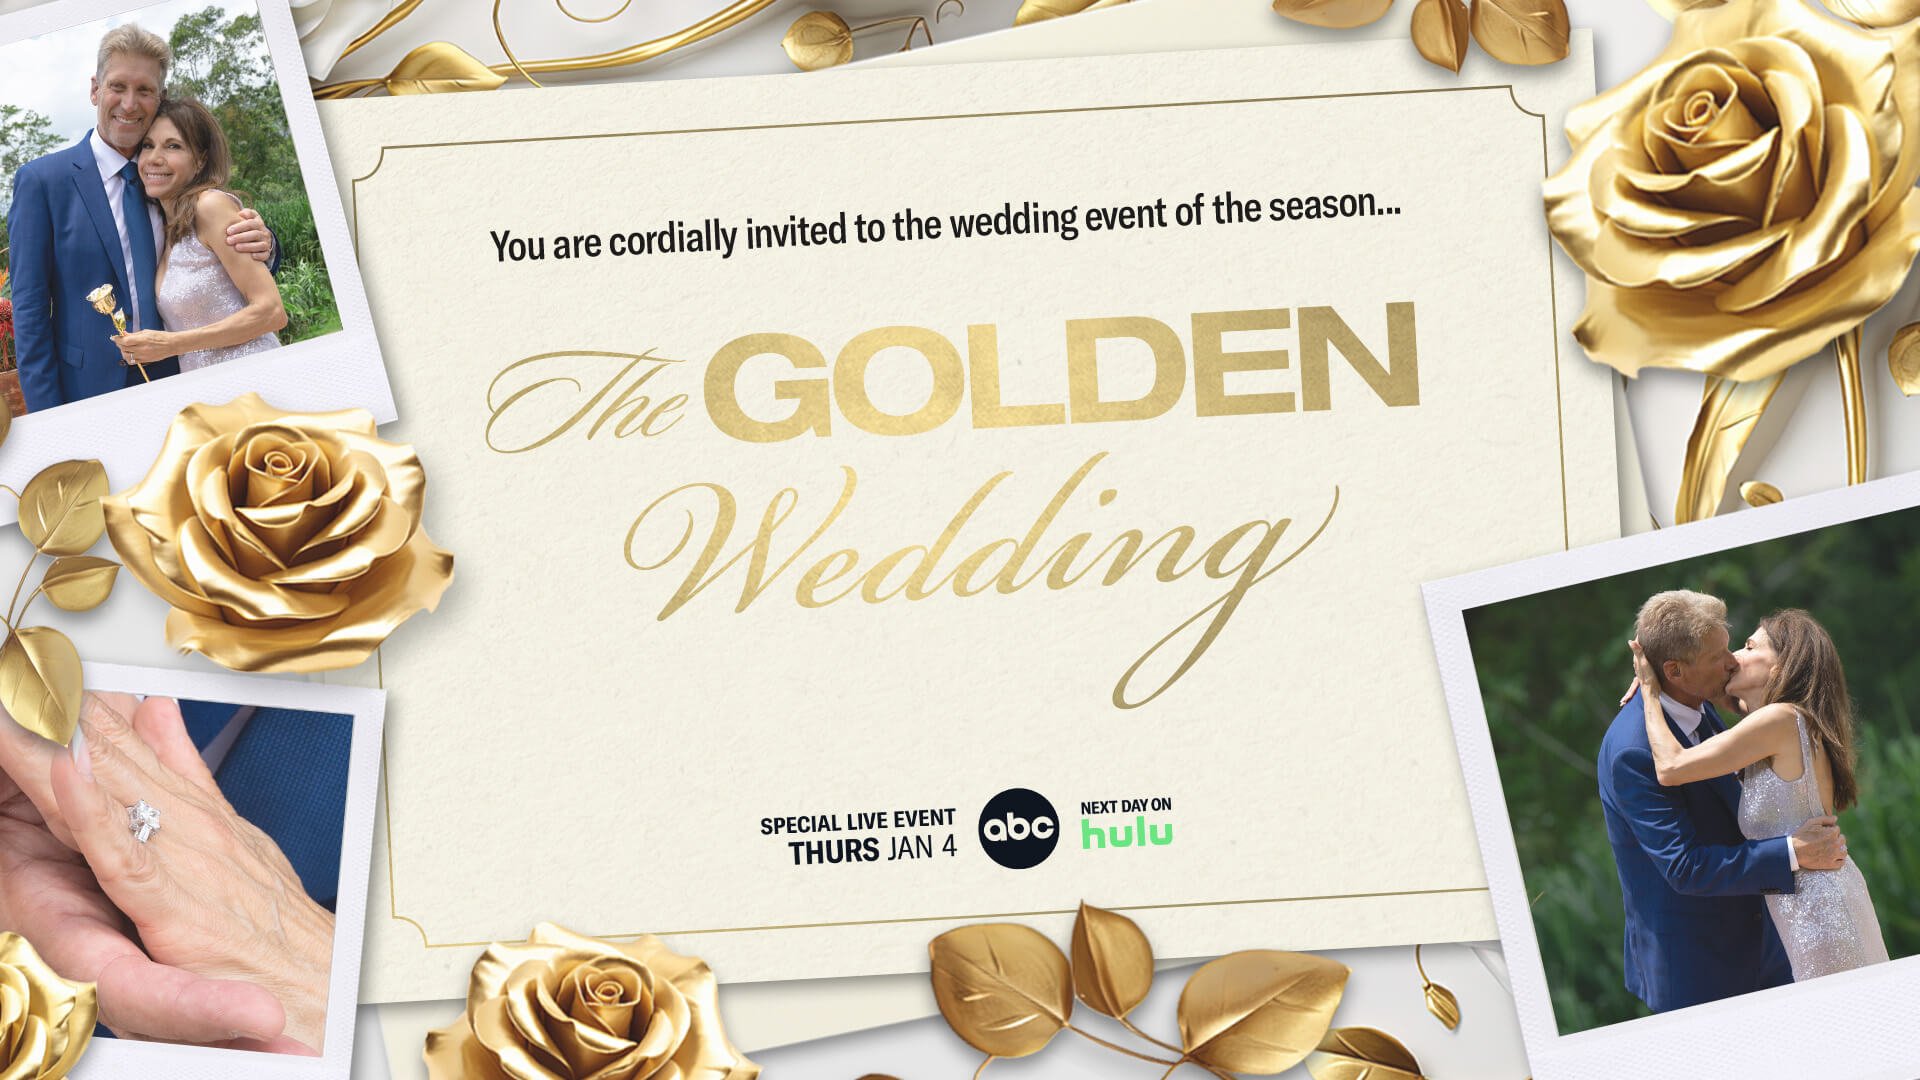 'The Golden Bachelor' wedding invitation with photos of Gerry Turner and Theresa Nist on the edges